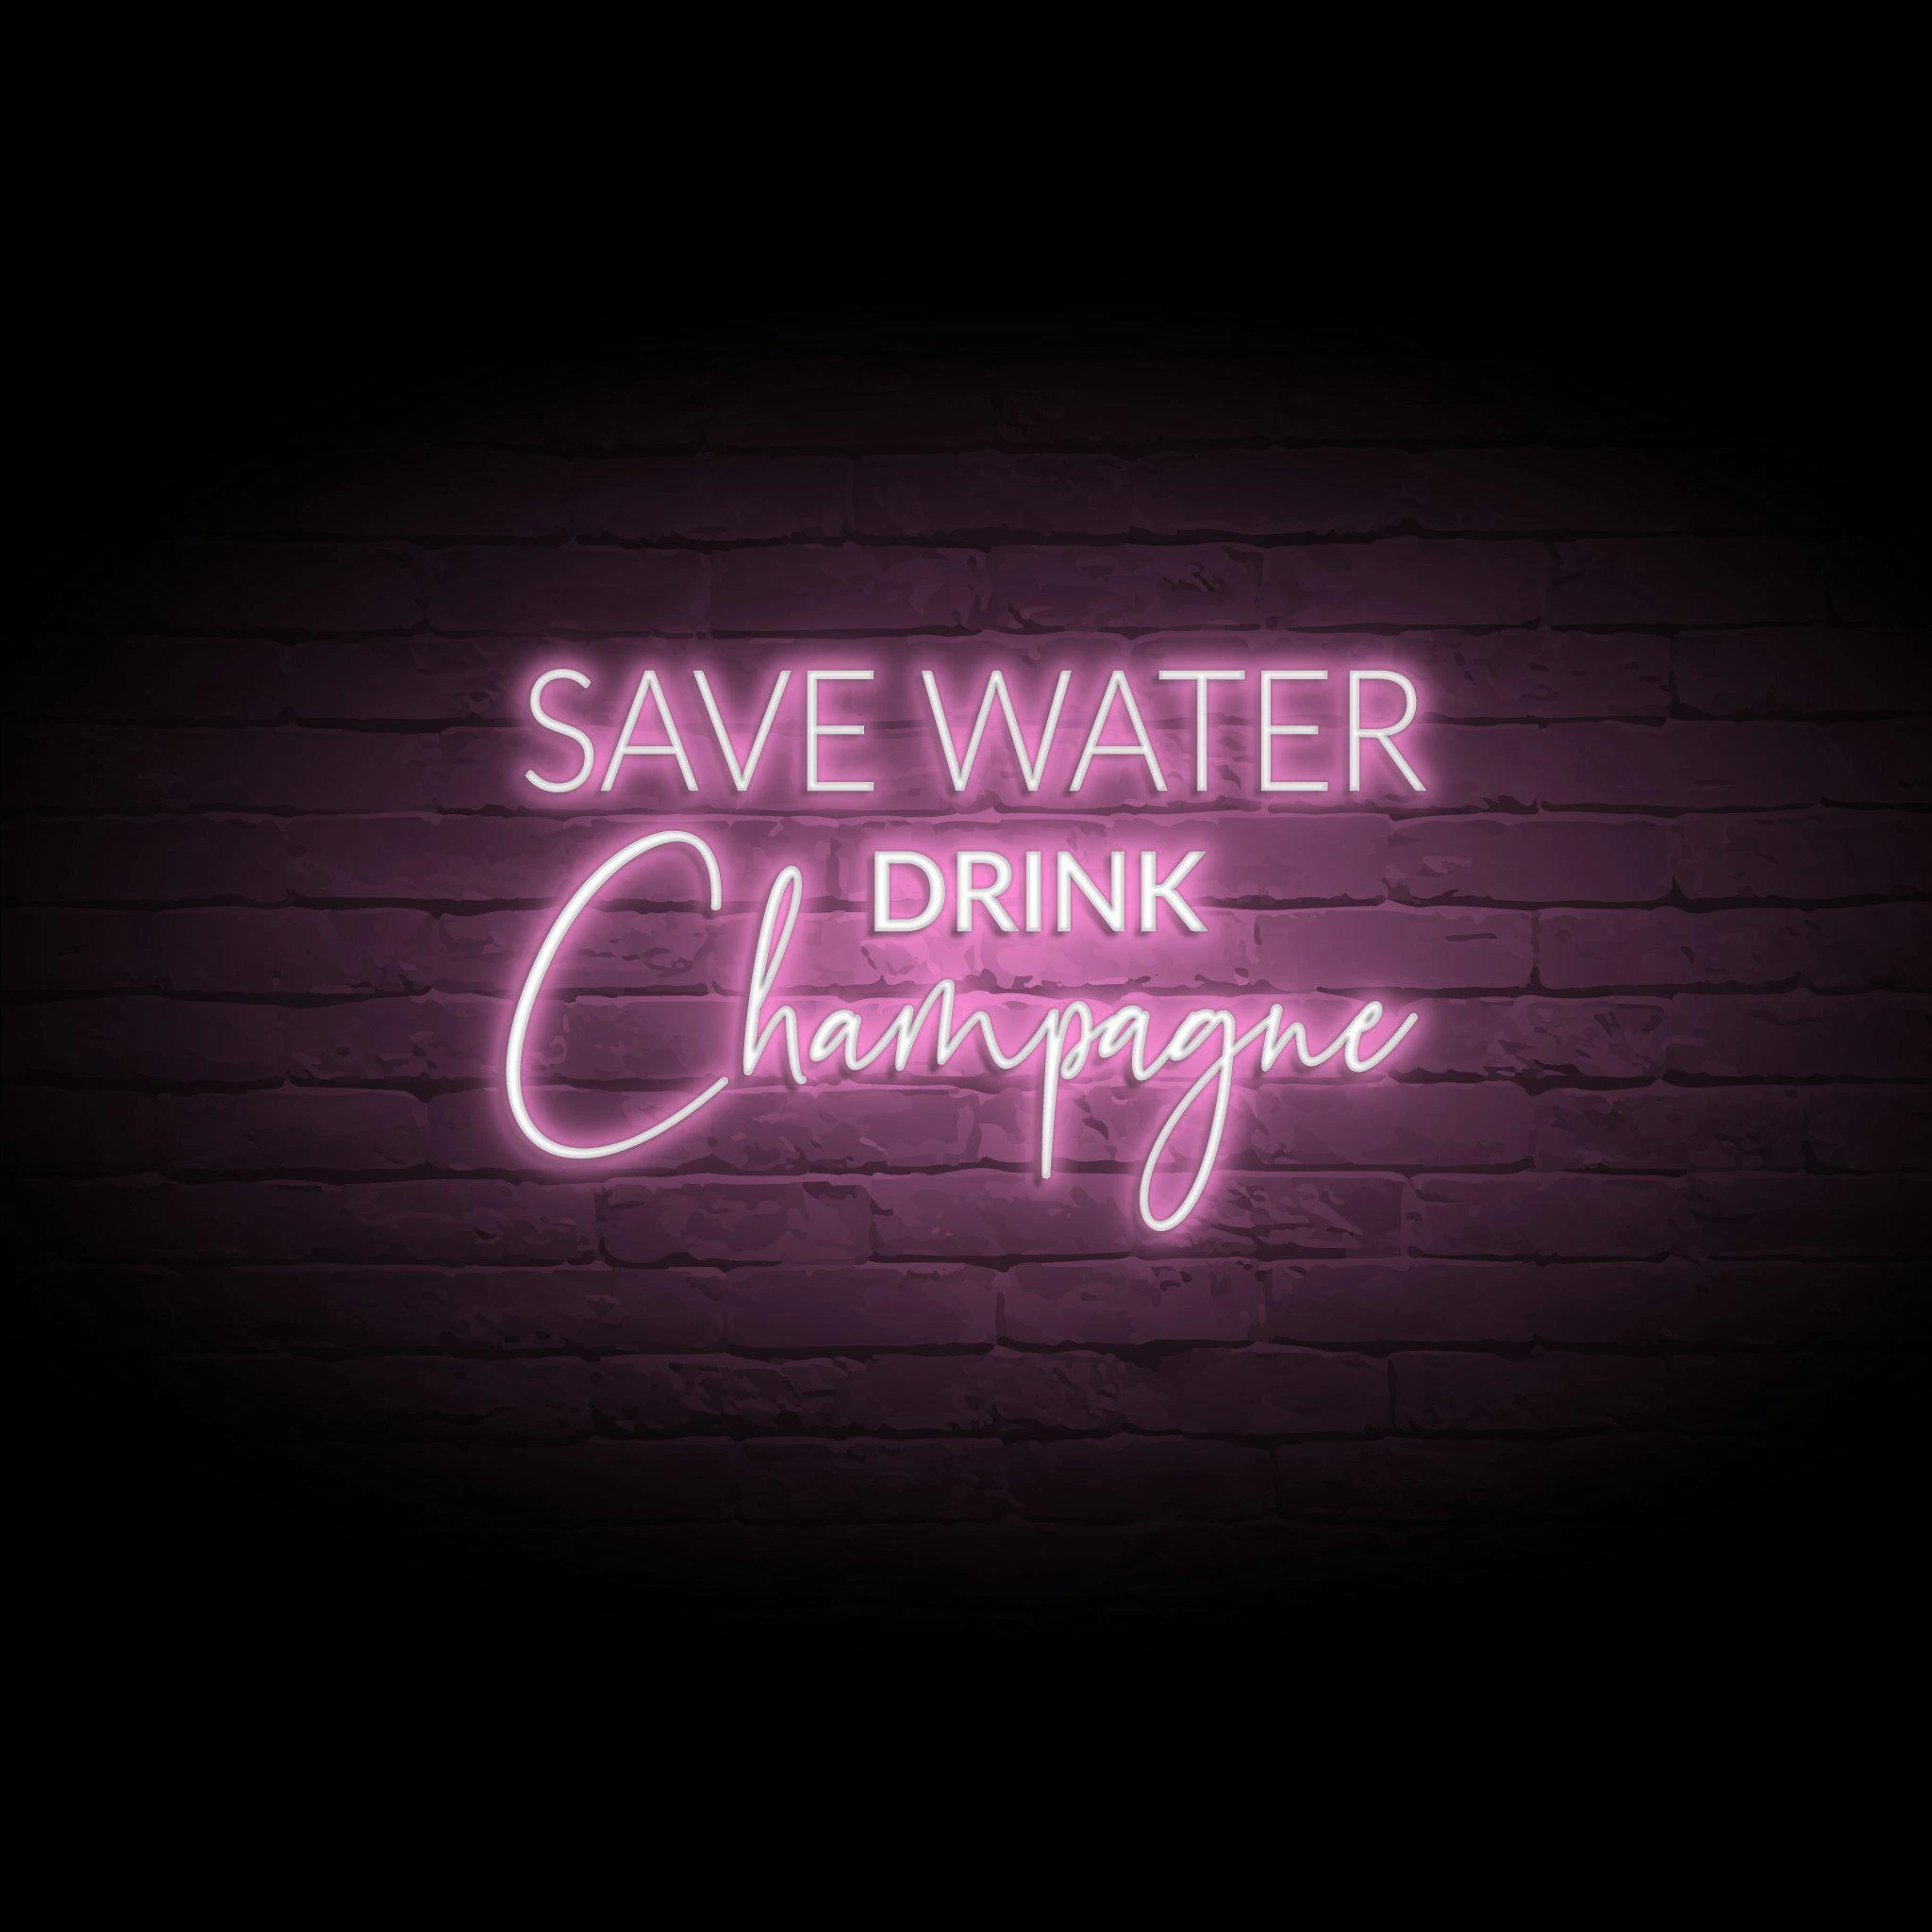 'SAVE WATER, DRINK CHAMPAGNE' NEON SIGN